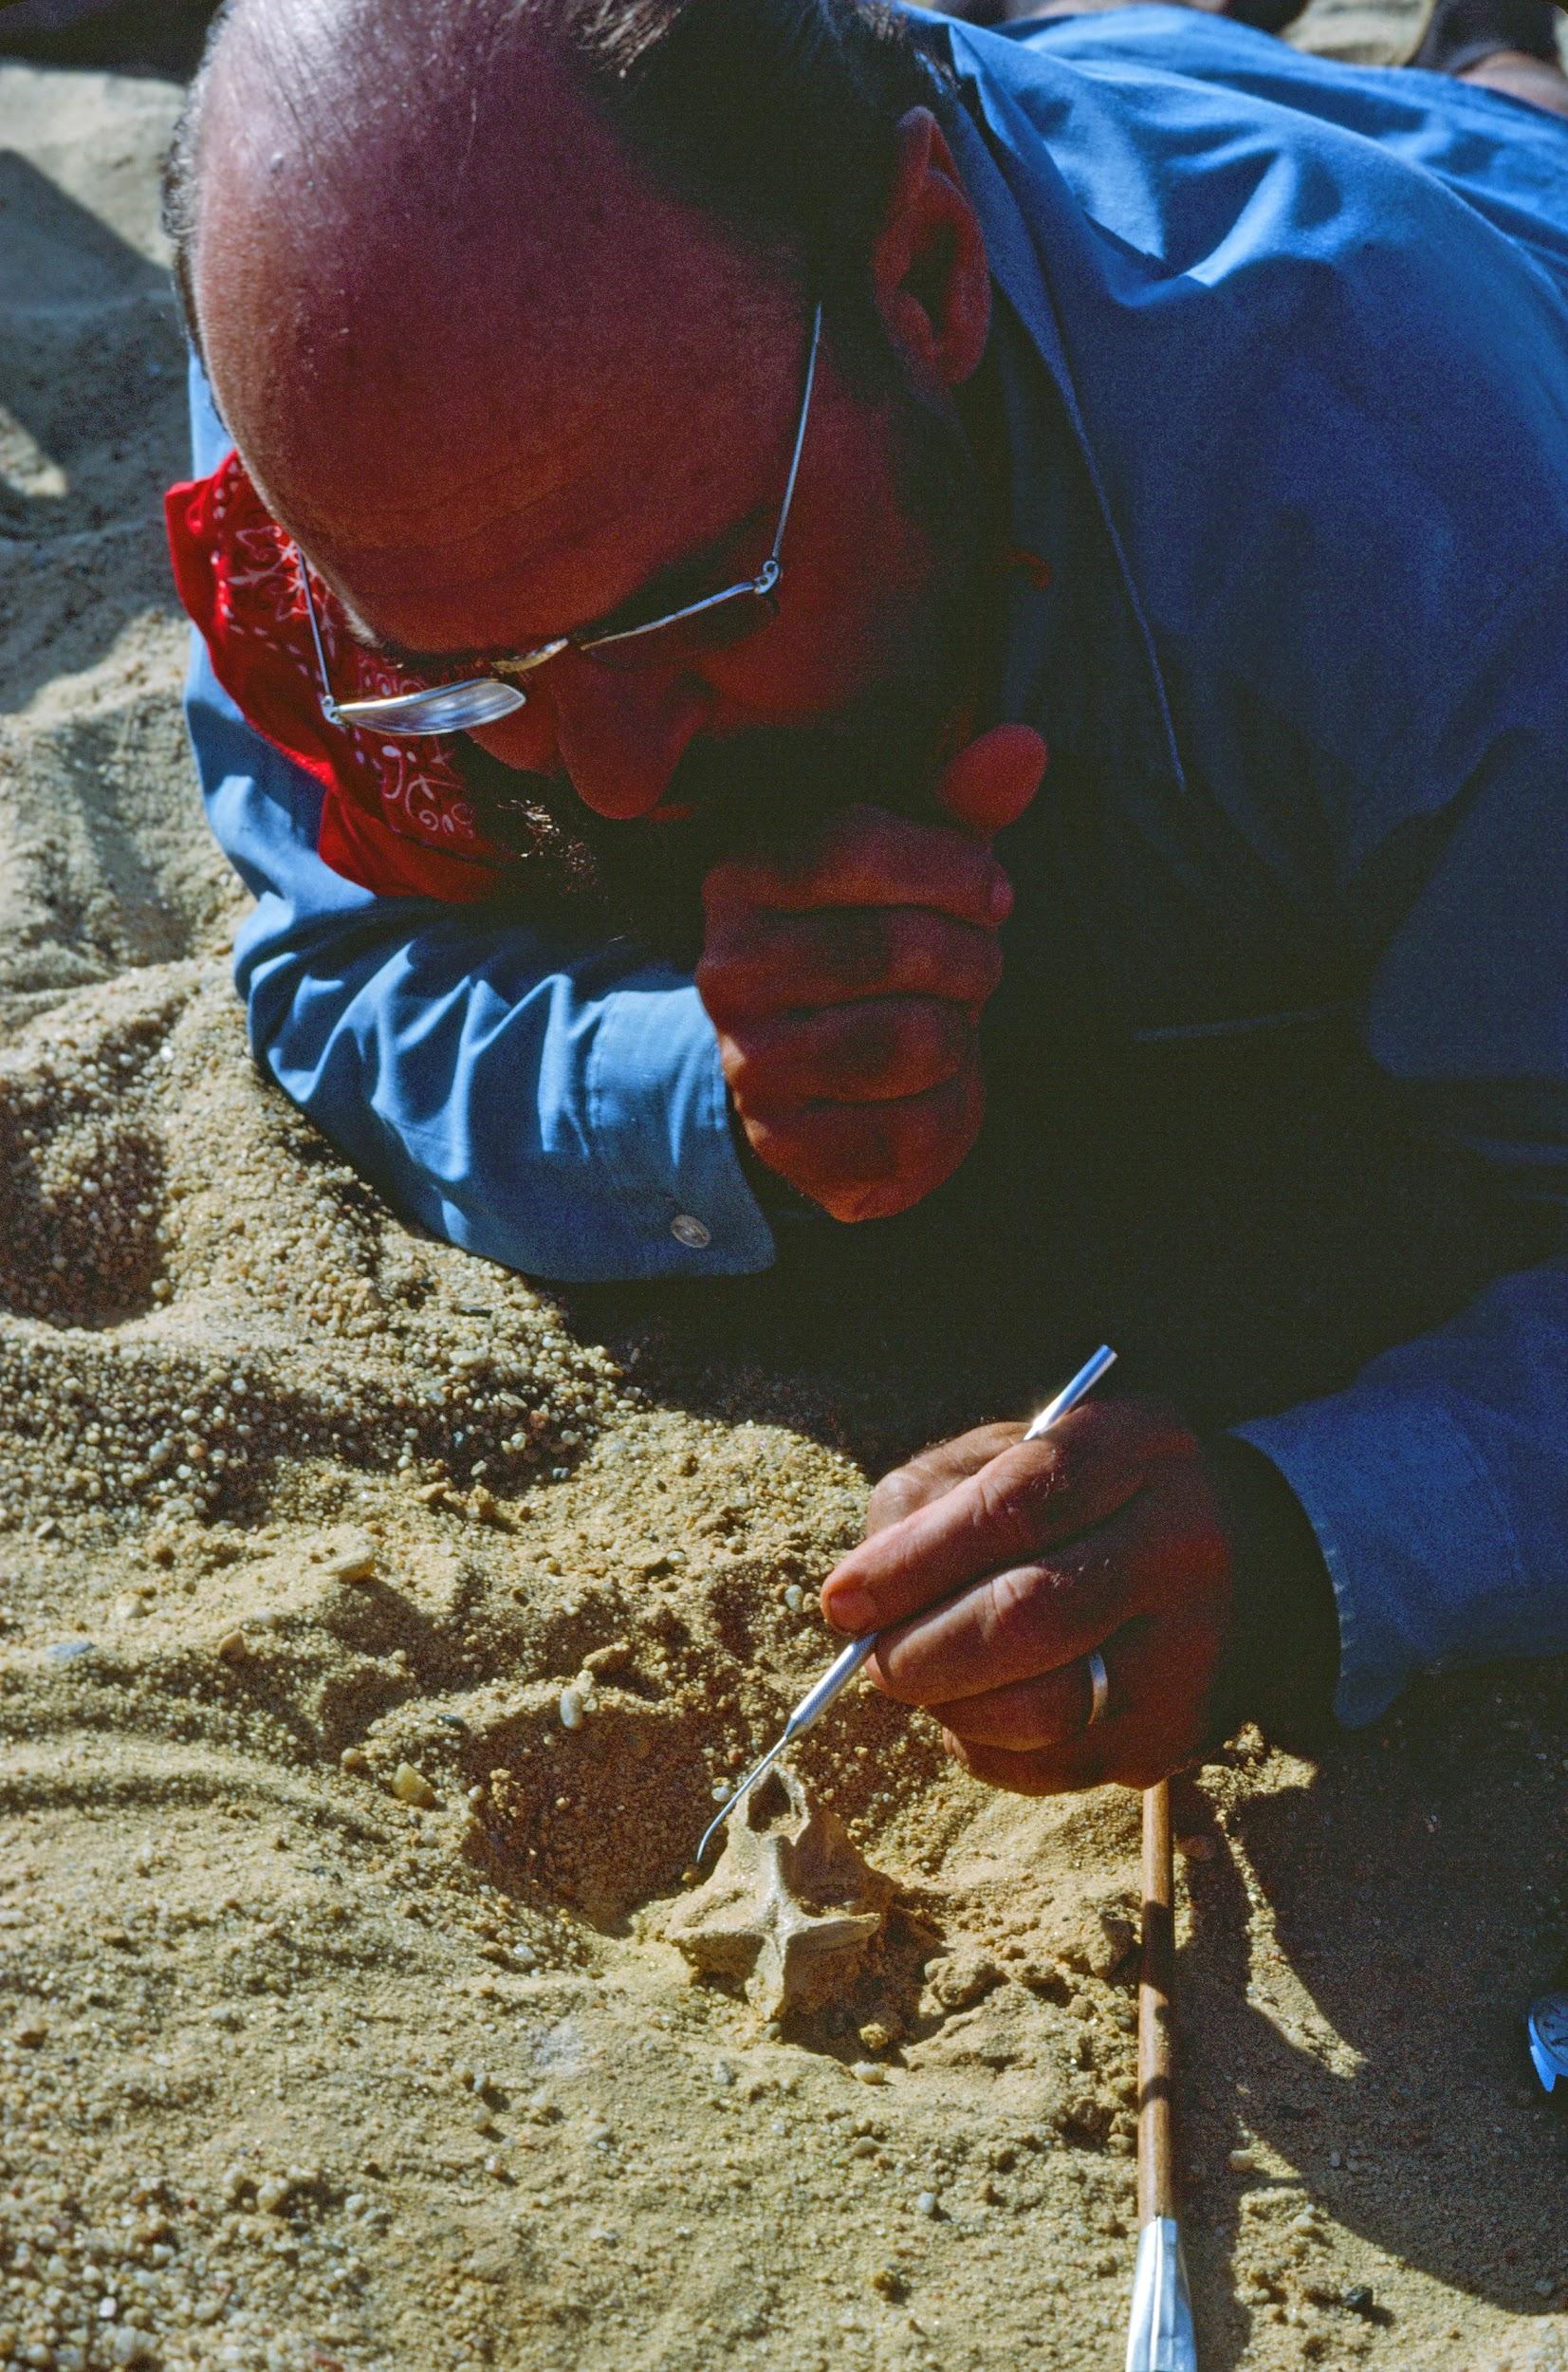 A person using a tool to expose bone in sand.